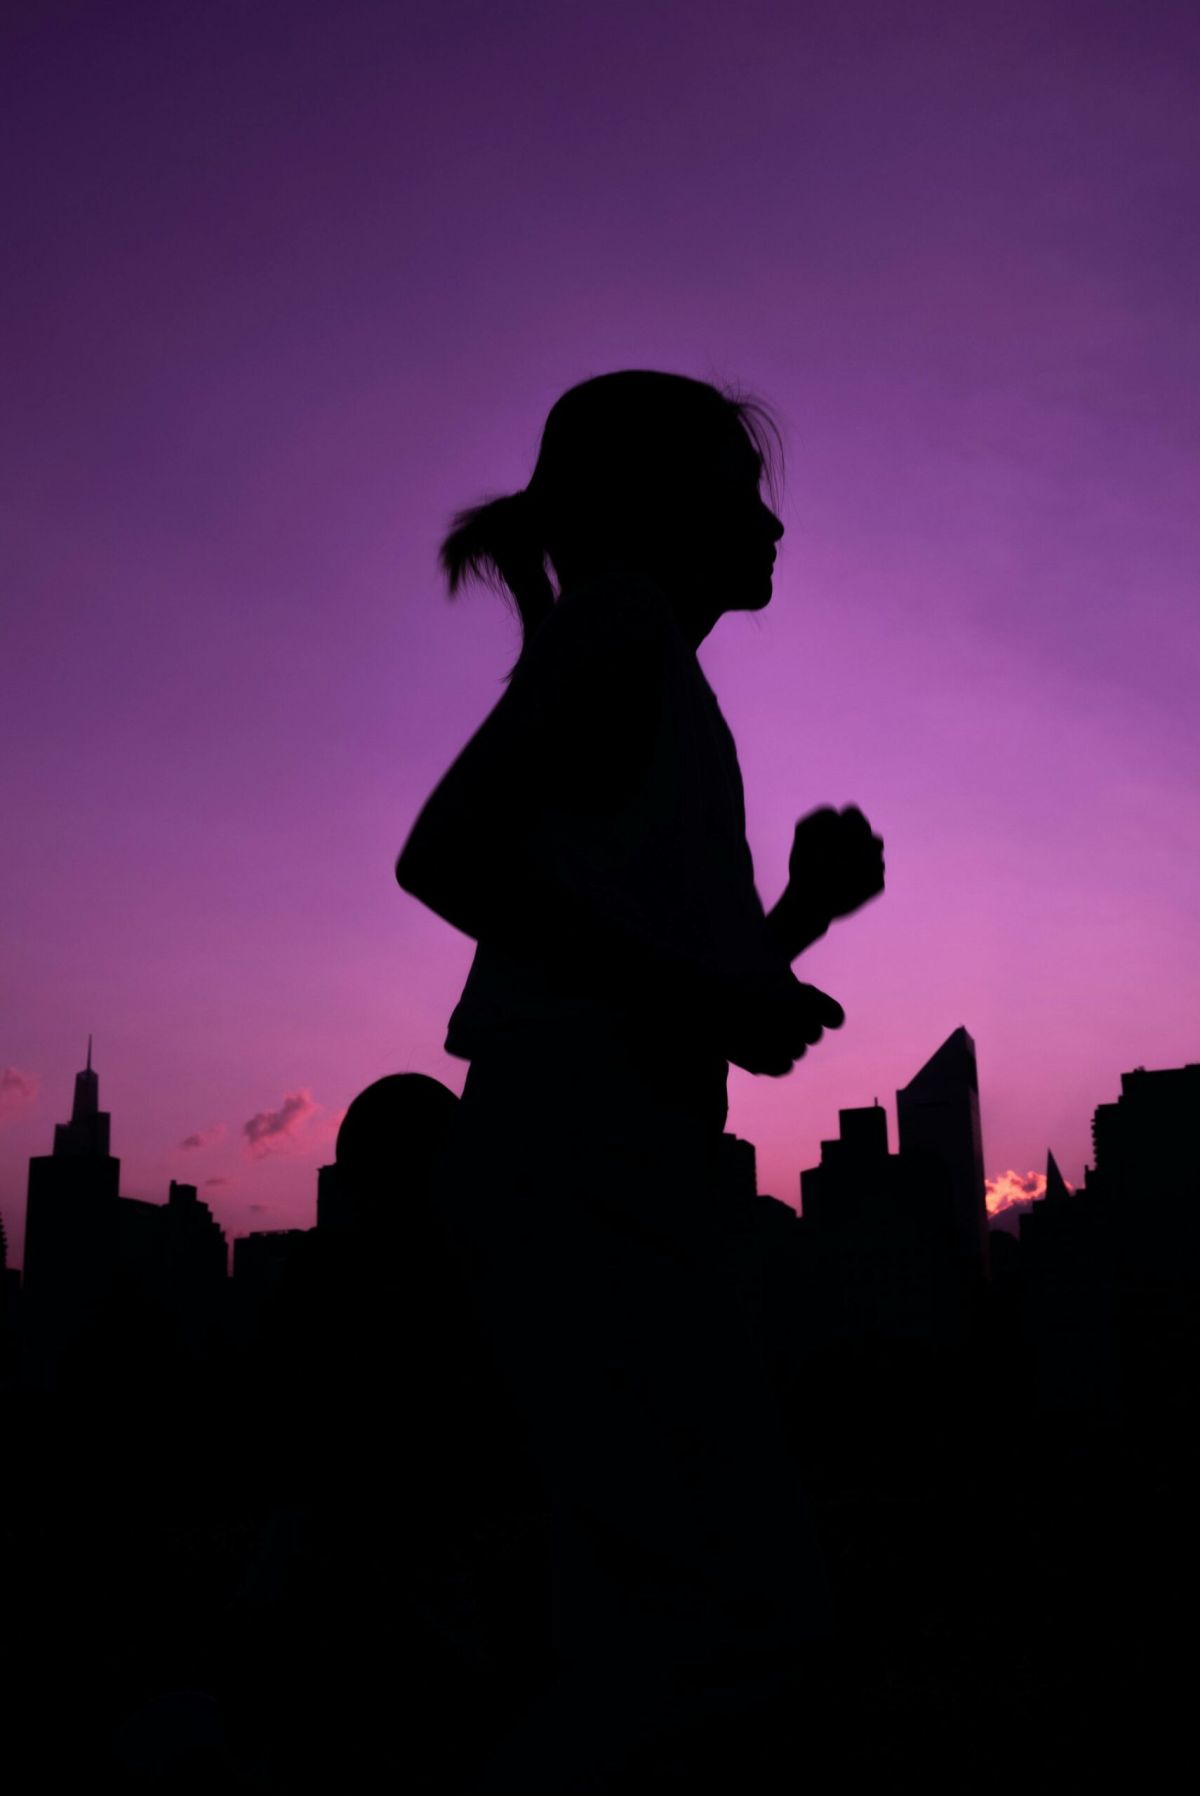 Manchester researchers find majority of women experience abuse while running